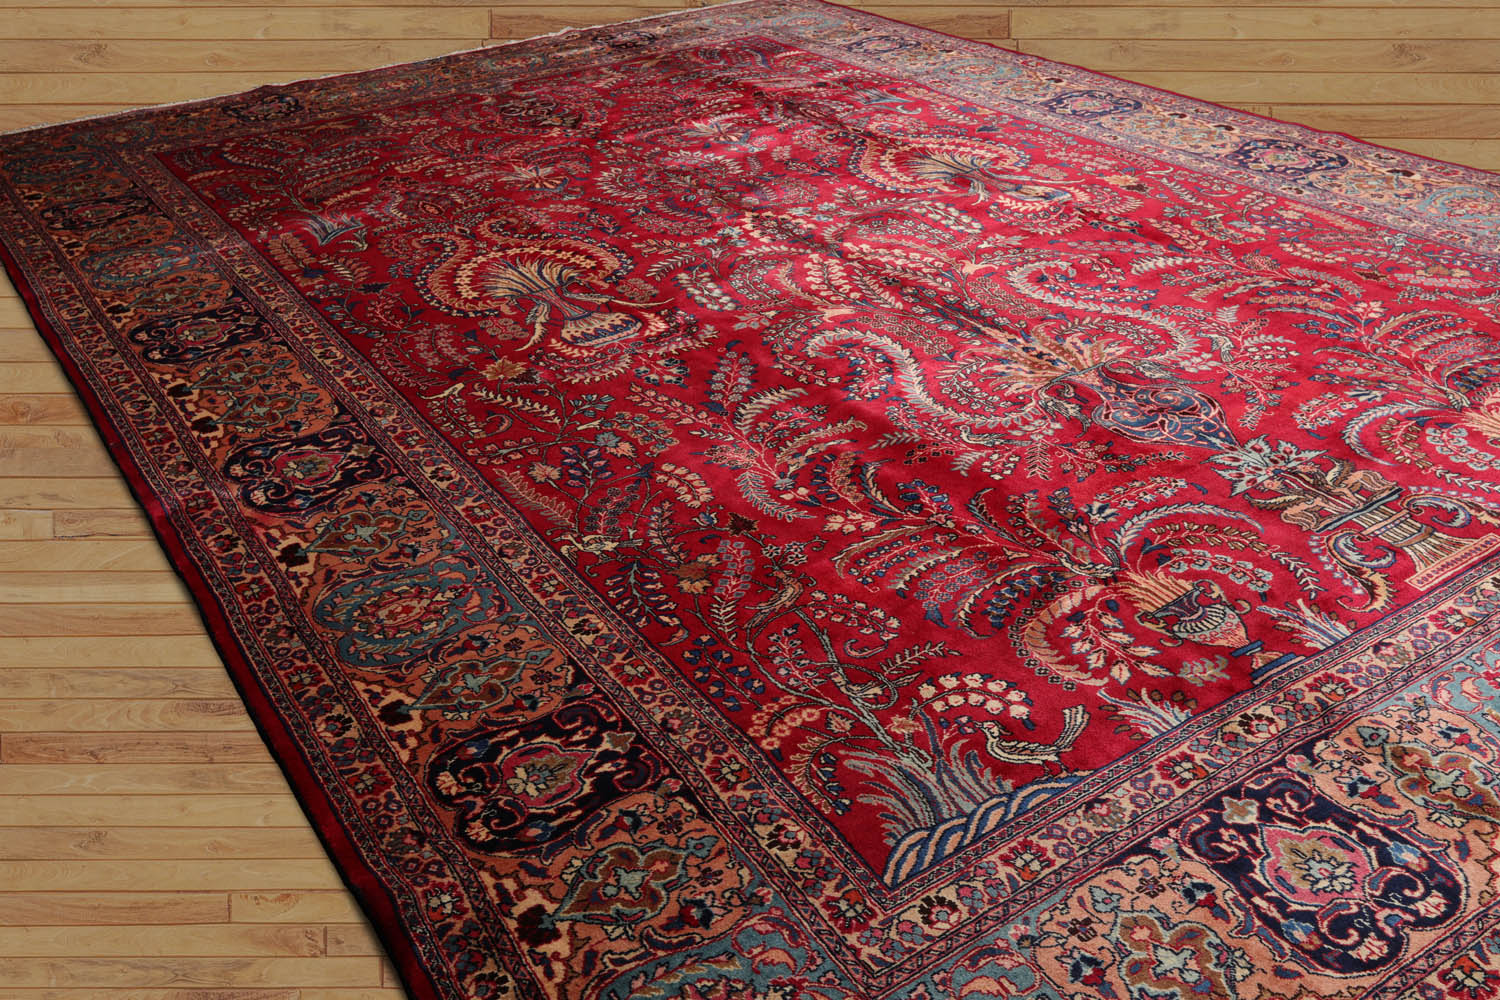 Briony Palace Hand Knotted 100% Wool Sarouk Traditional Oriental Area Rug Red, Peach Color